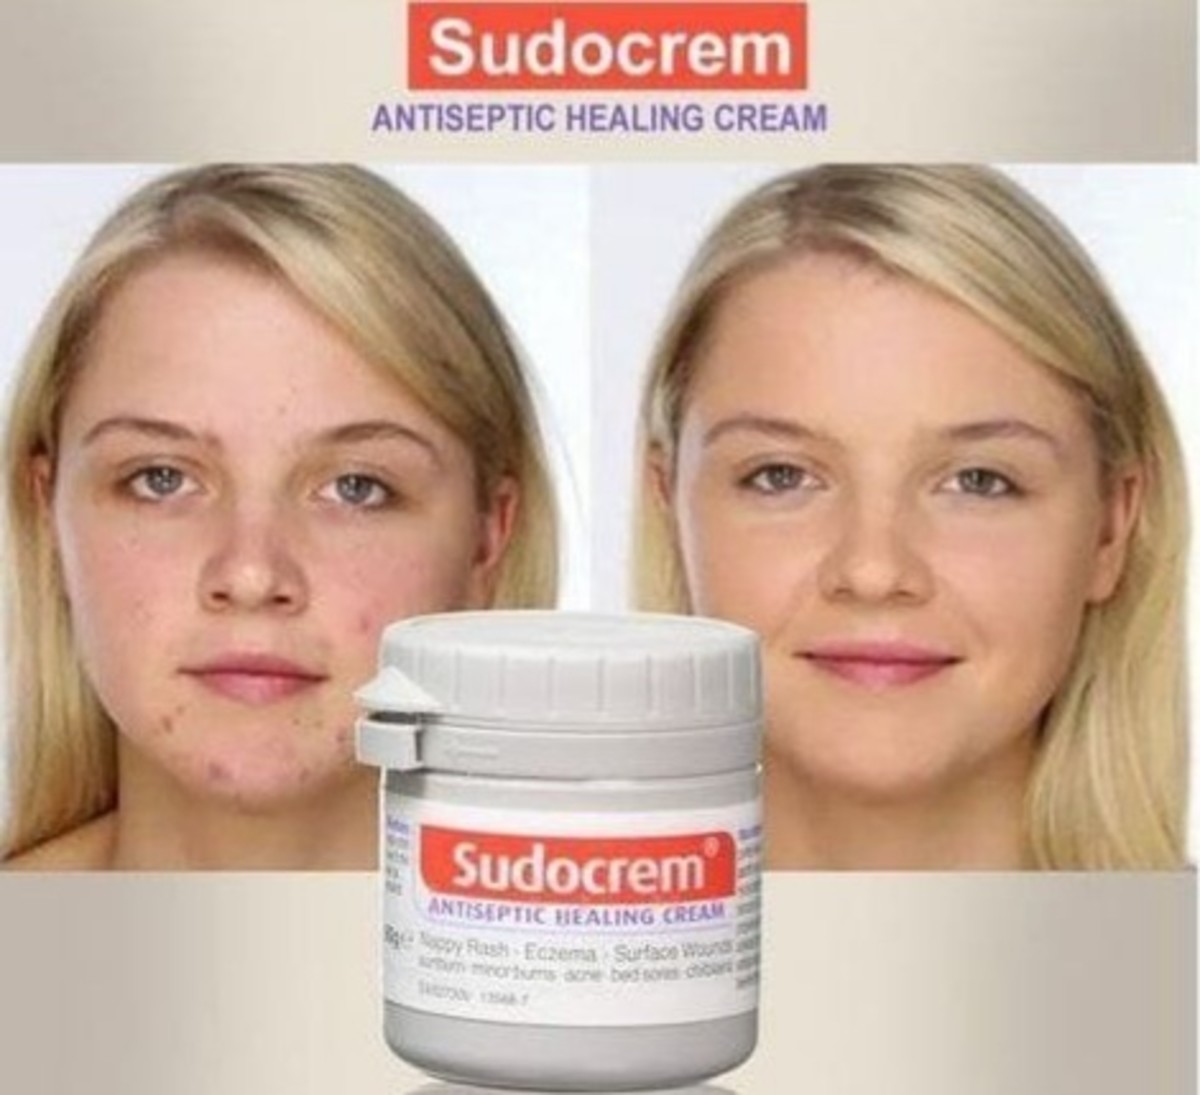 sudocrem-uses-and-benefits-on-acne-prone-skin